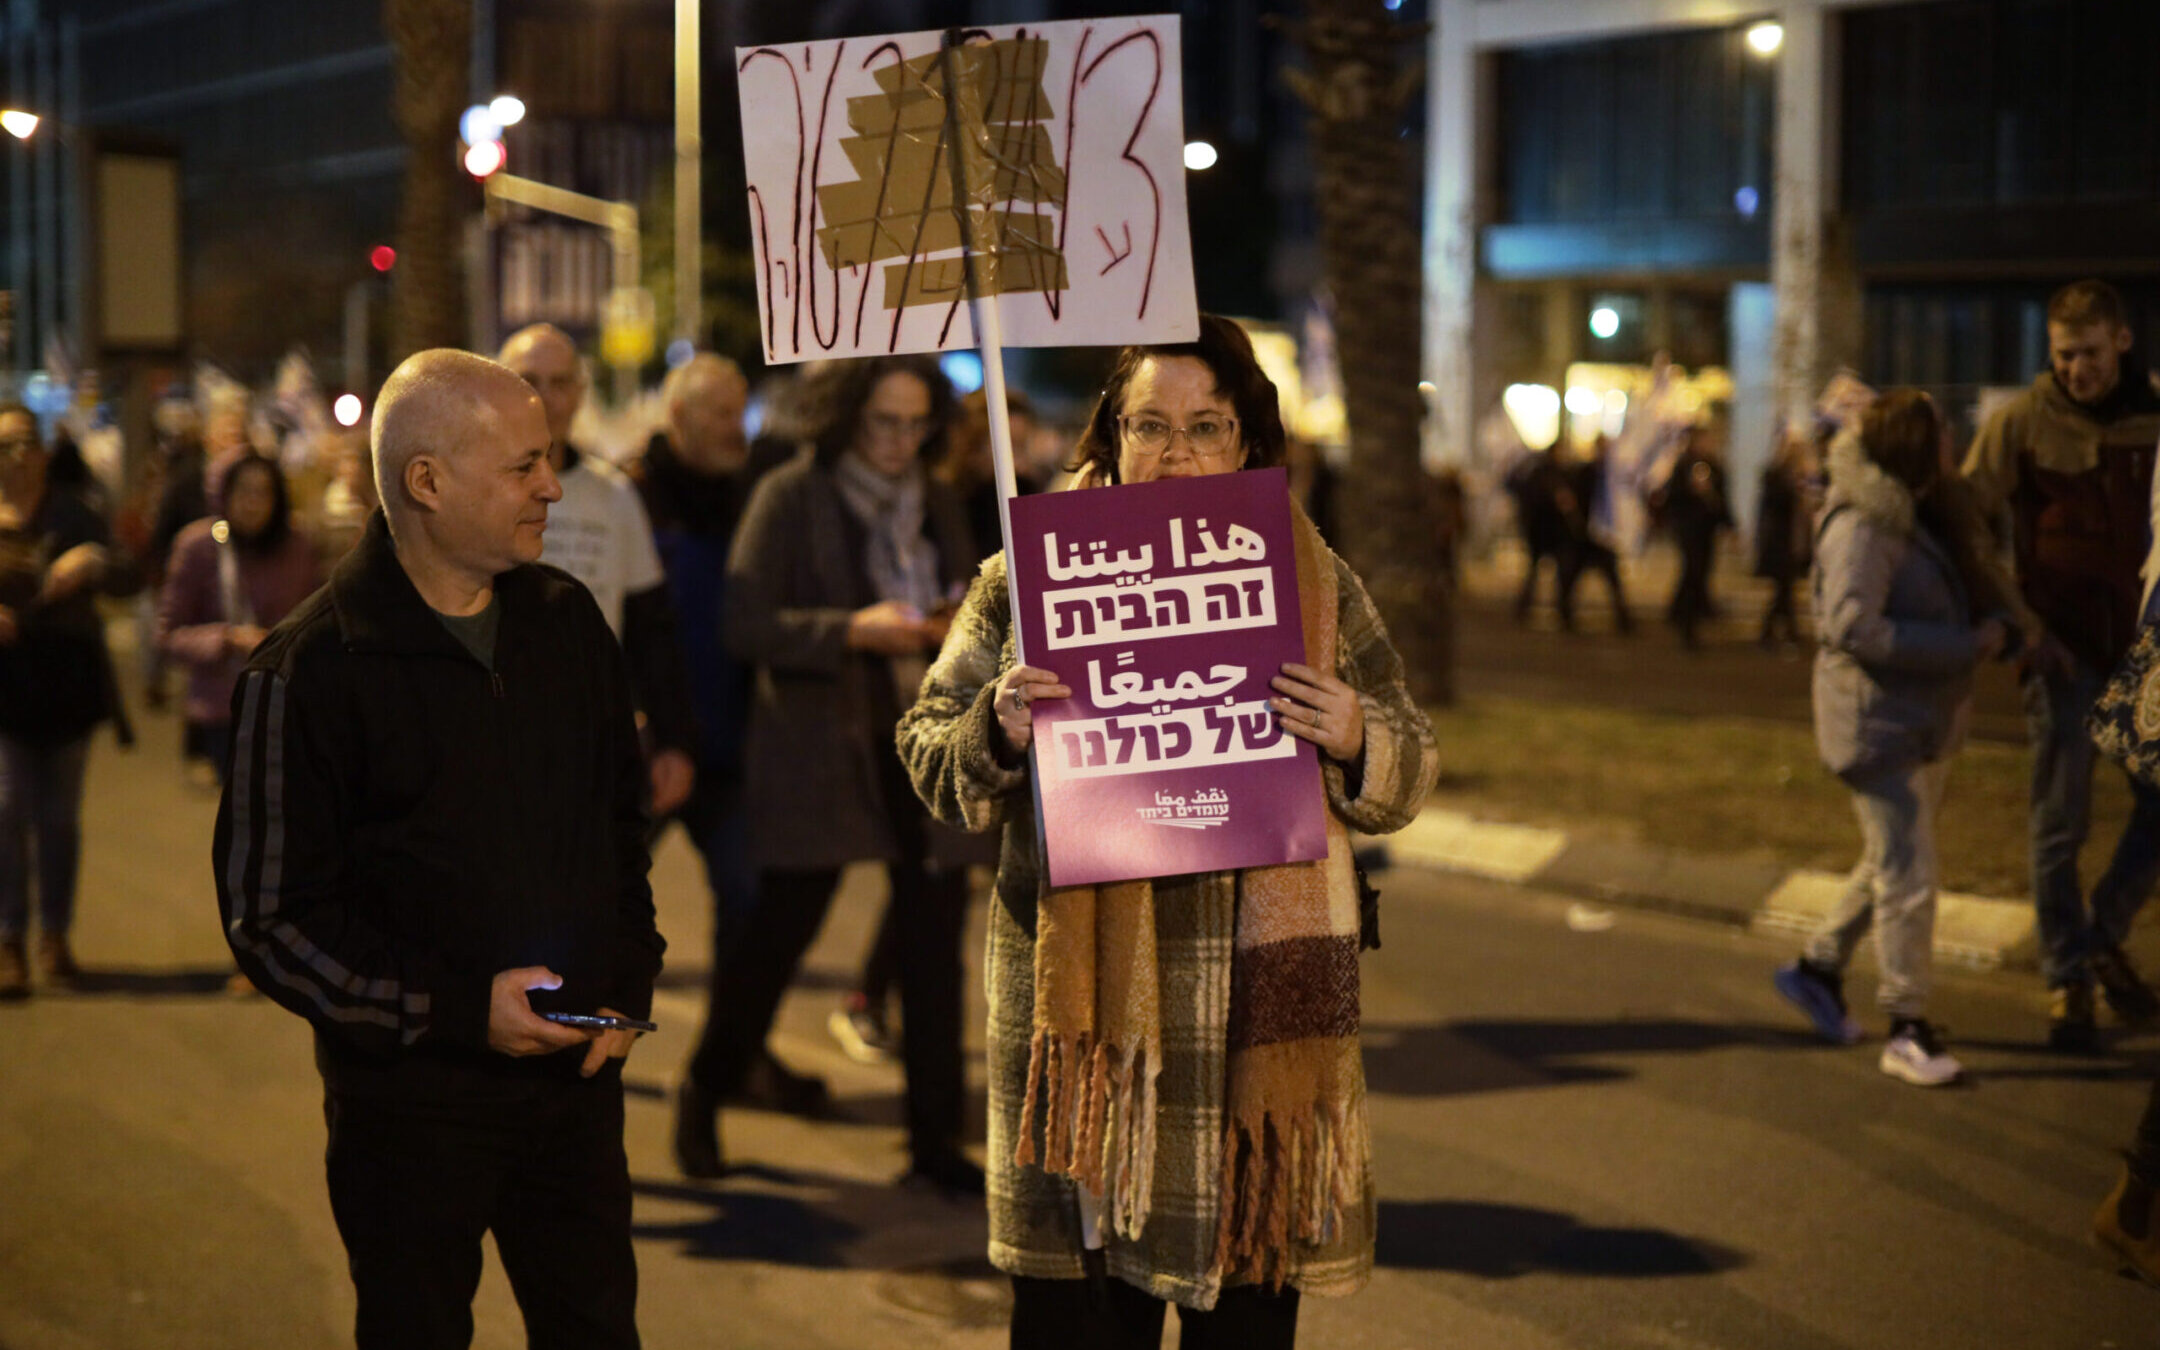 A lone protester advocating in Hebrew and Arabic for coexistence participates in a protest against planned changes to Israel’s judicial system, Tel Aviv, Feb. 11, 2023. (Saeed Qaq/Anadolu Agency via Getty Images)